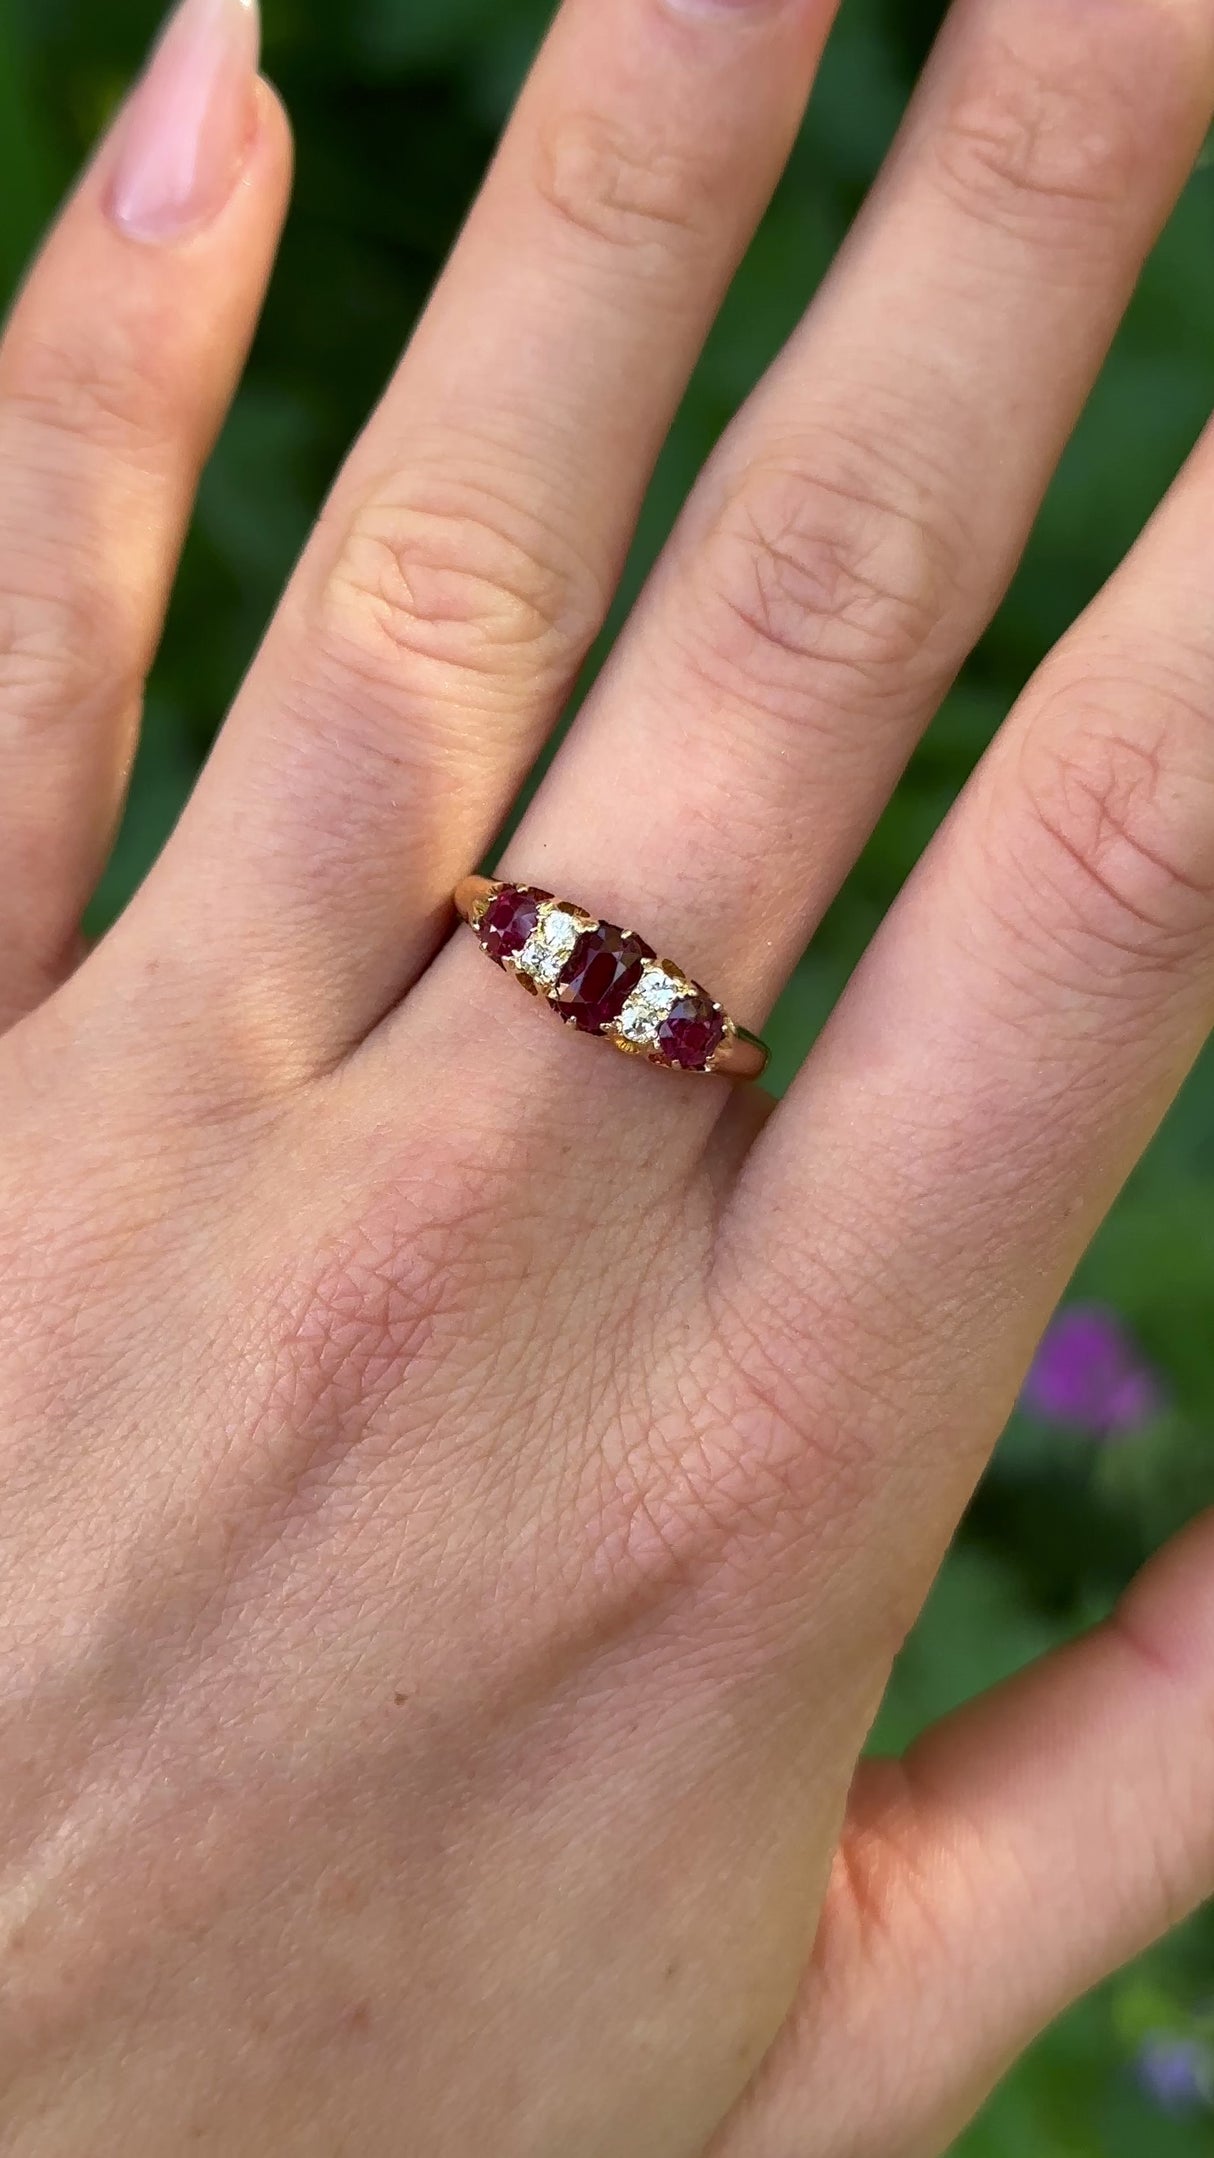 Antique, Edwardian Three-Stone Ruby and Diamond Ring, 18ct Yellow Gold worn on hand.